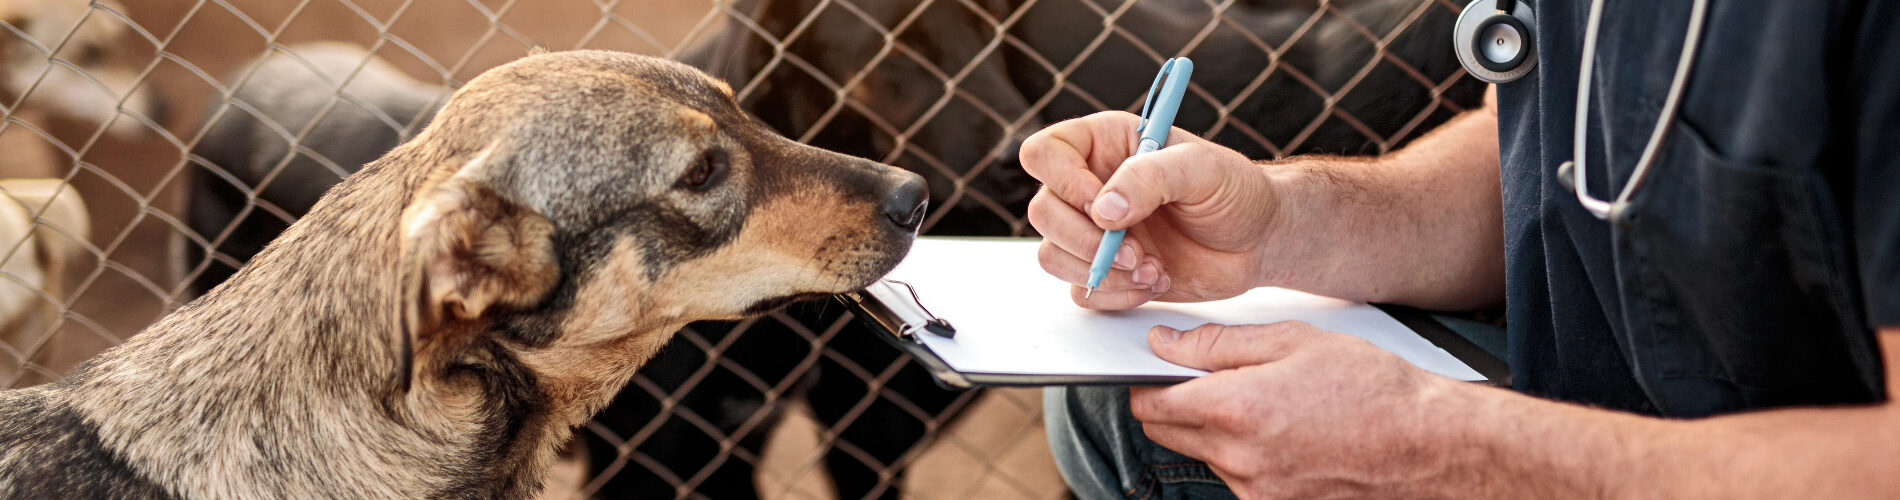 A dog looking at a person writing on a clipboard